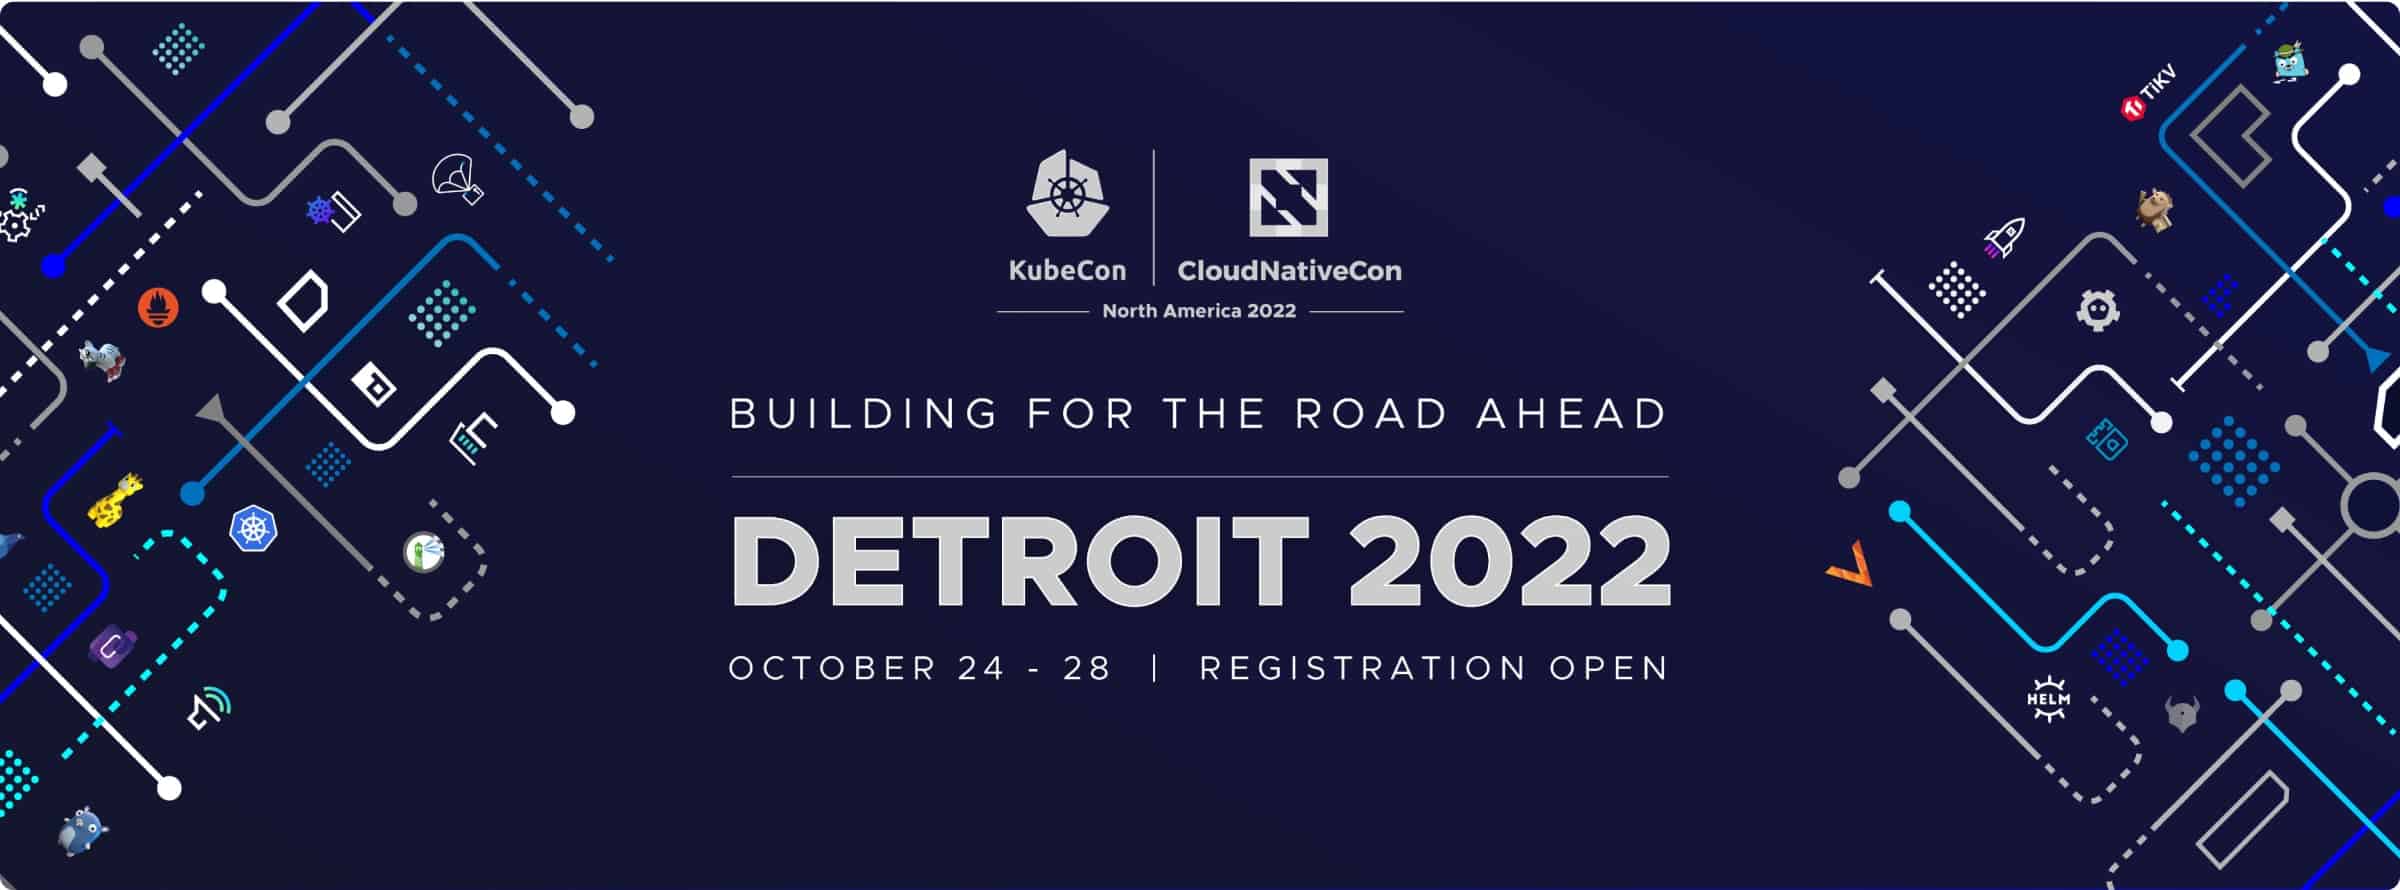 KubeCon + CloudNativeCon North America 2022 in Detroit from October 24th-28th